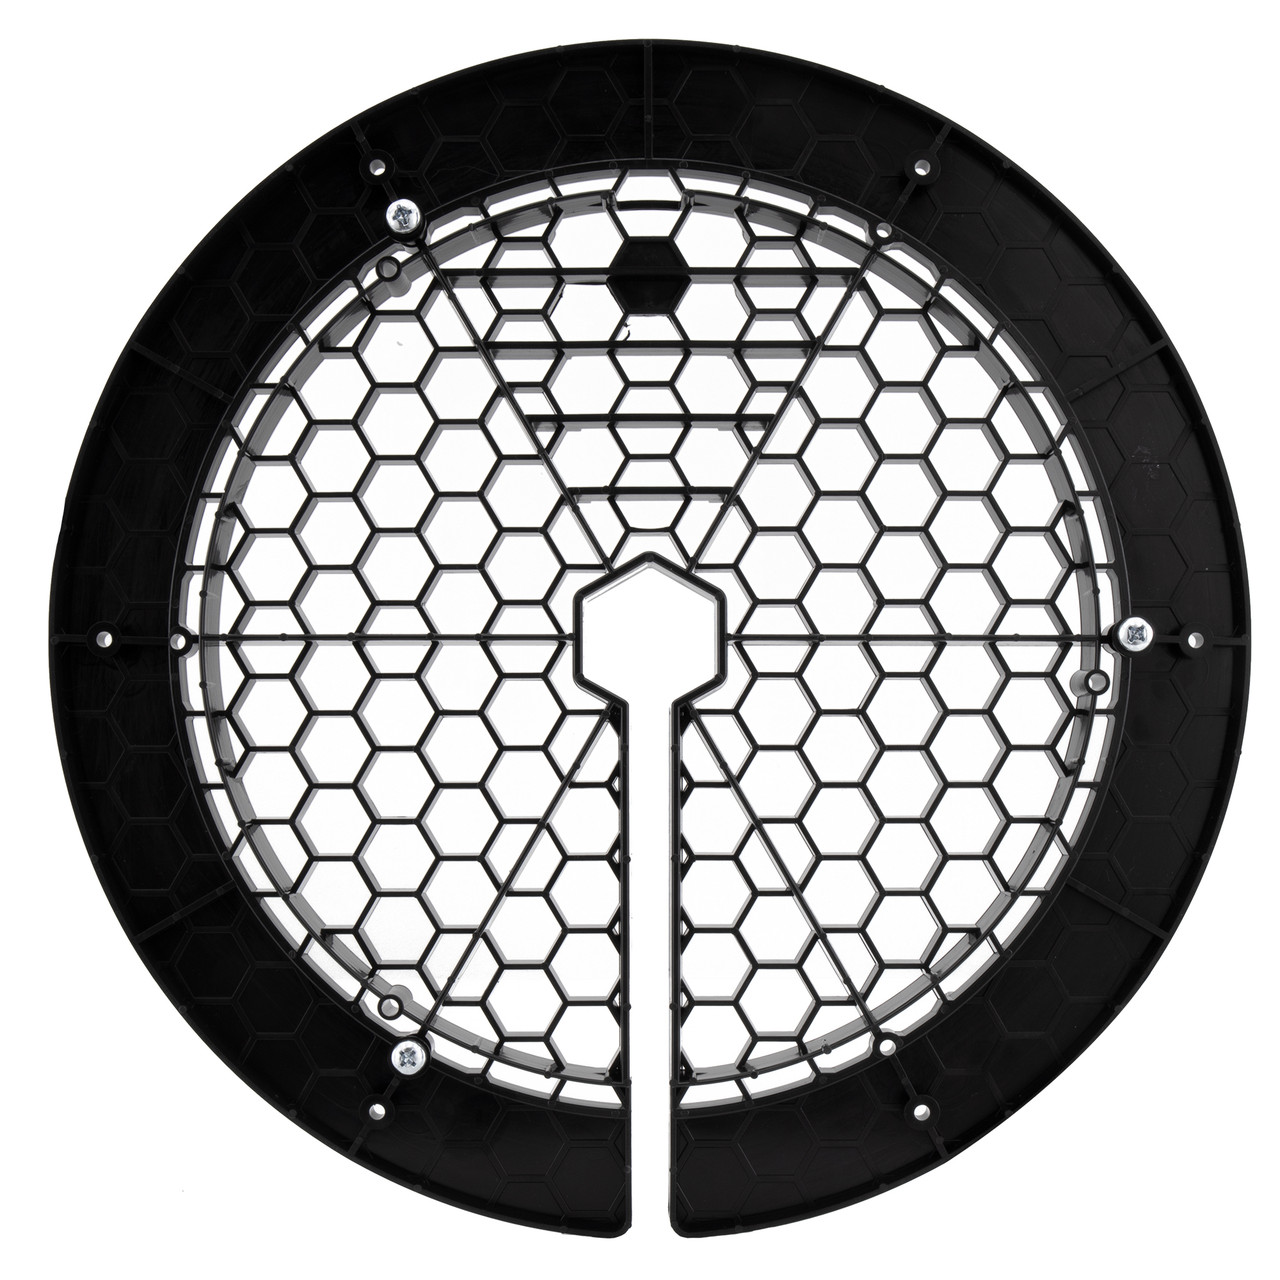 Ice Fishing Ice Hole Mesh Safety Cover Lid